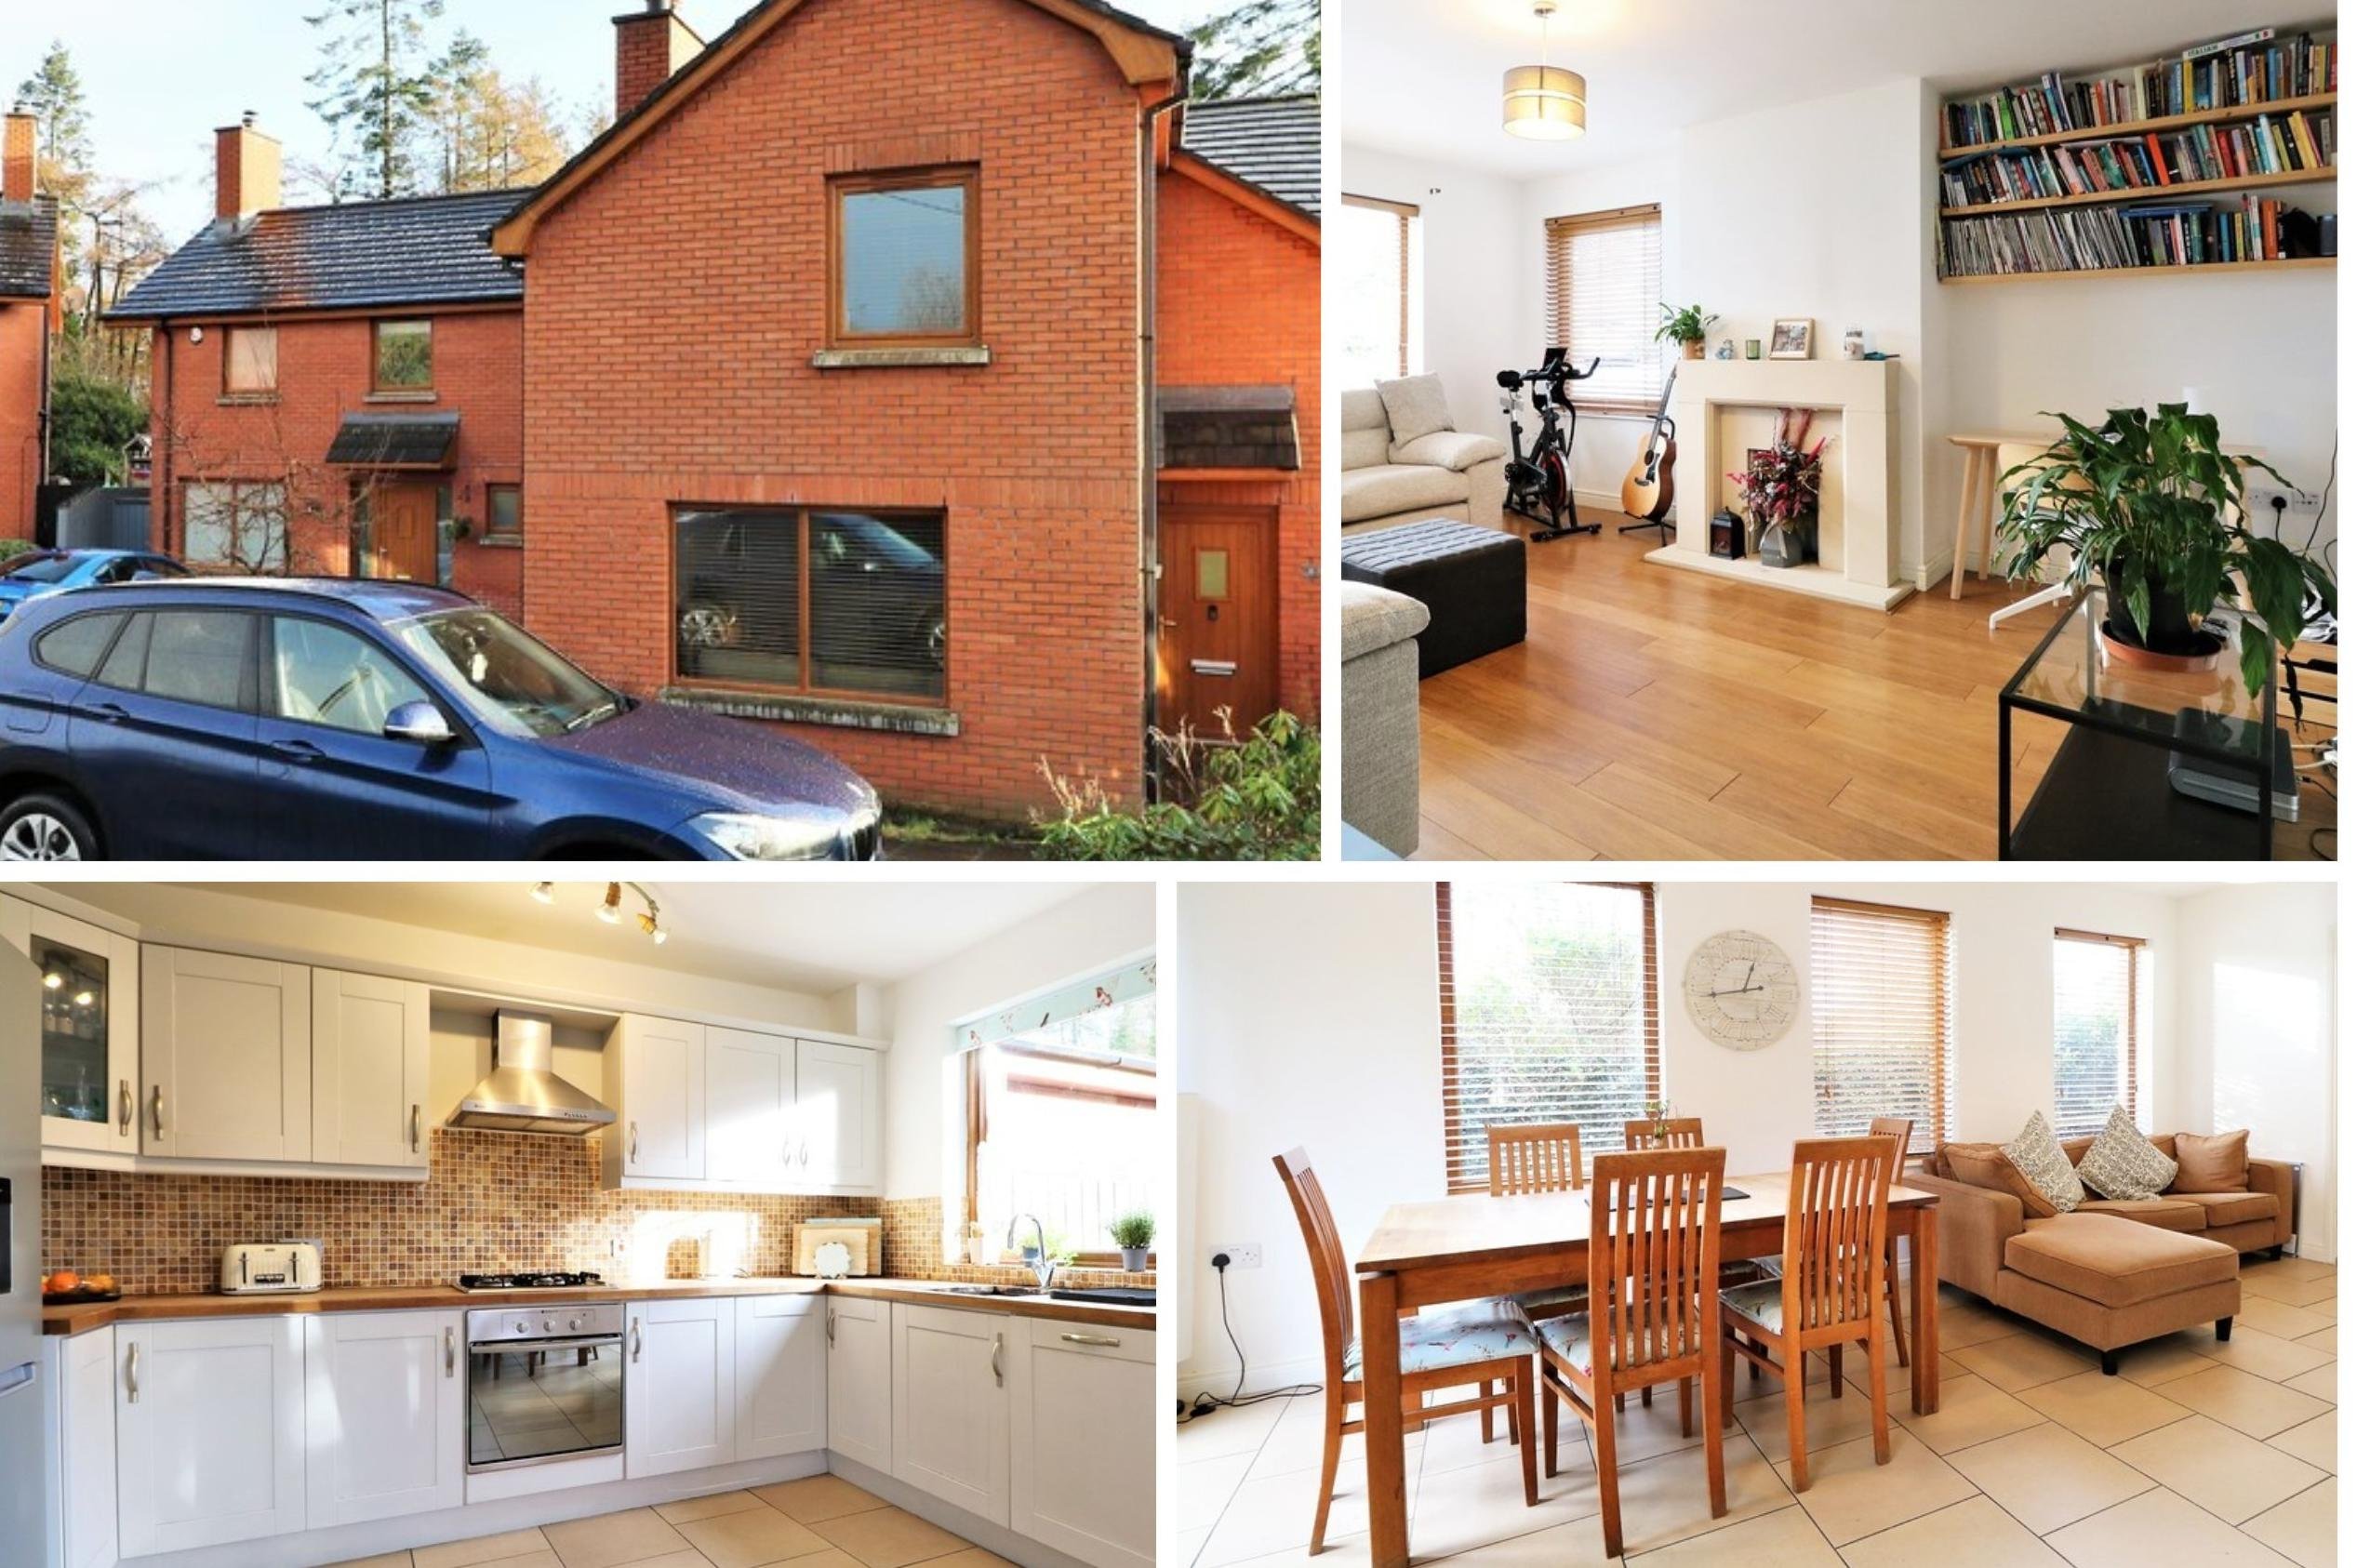 East Antrim property: take a look inside this spacious three-bed semi